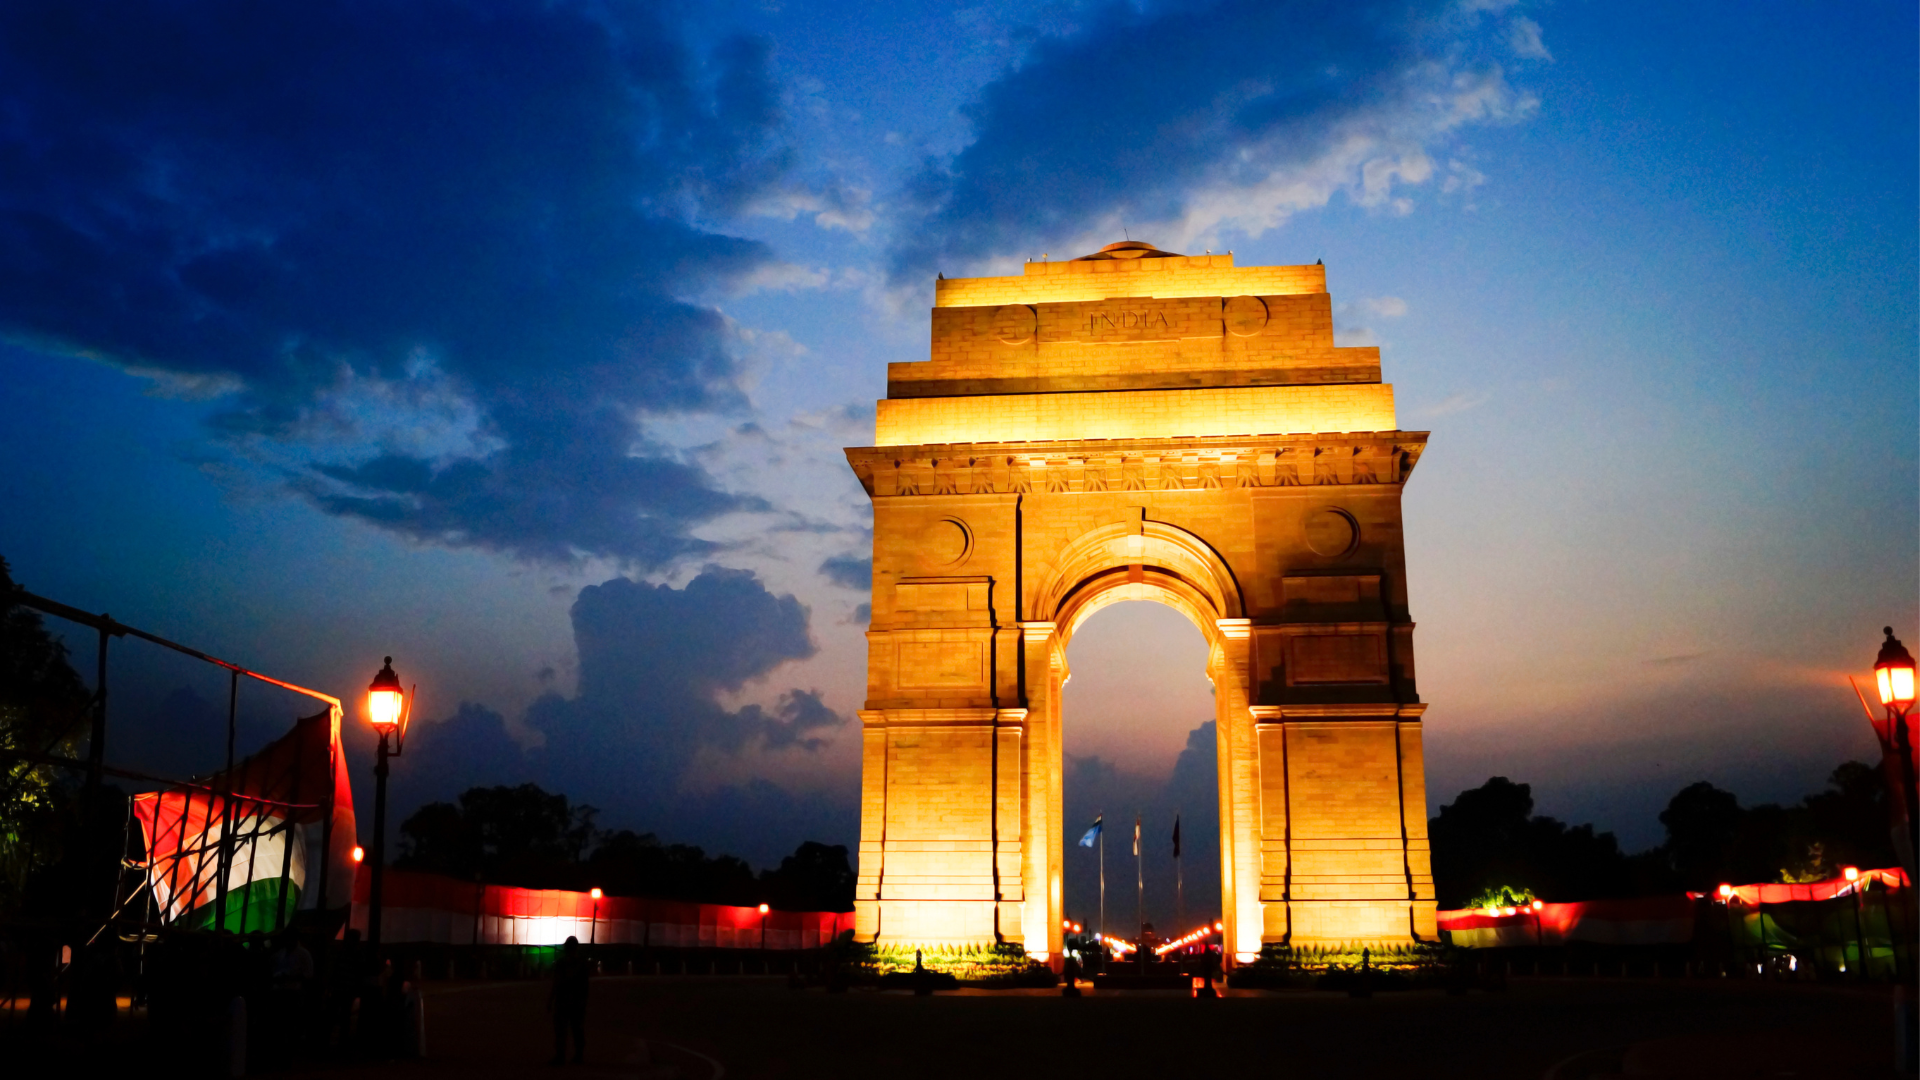 Business Class Tickets to India from $699-Businessflightsexpert